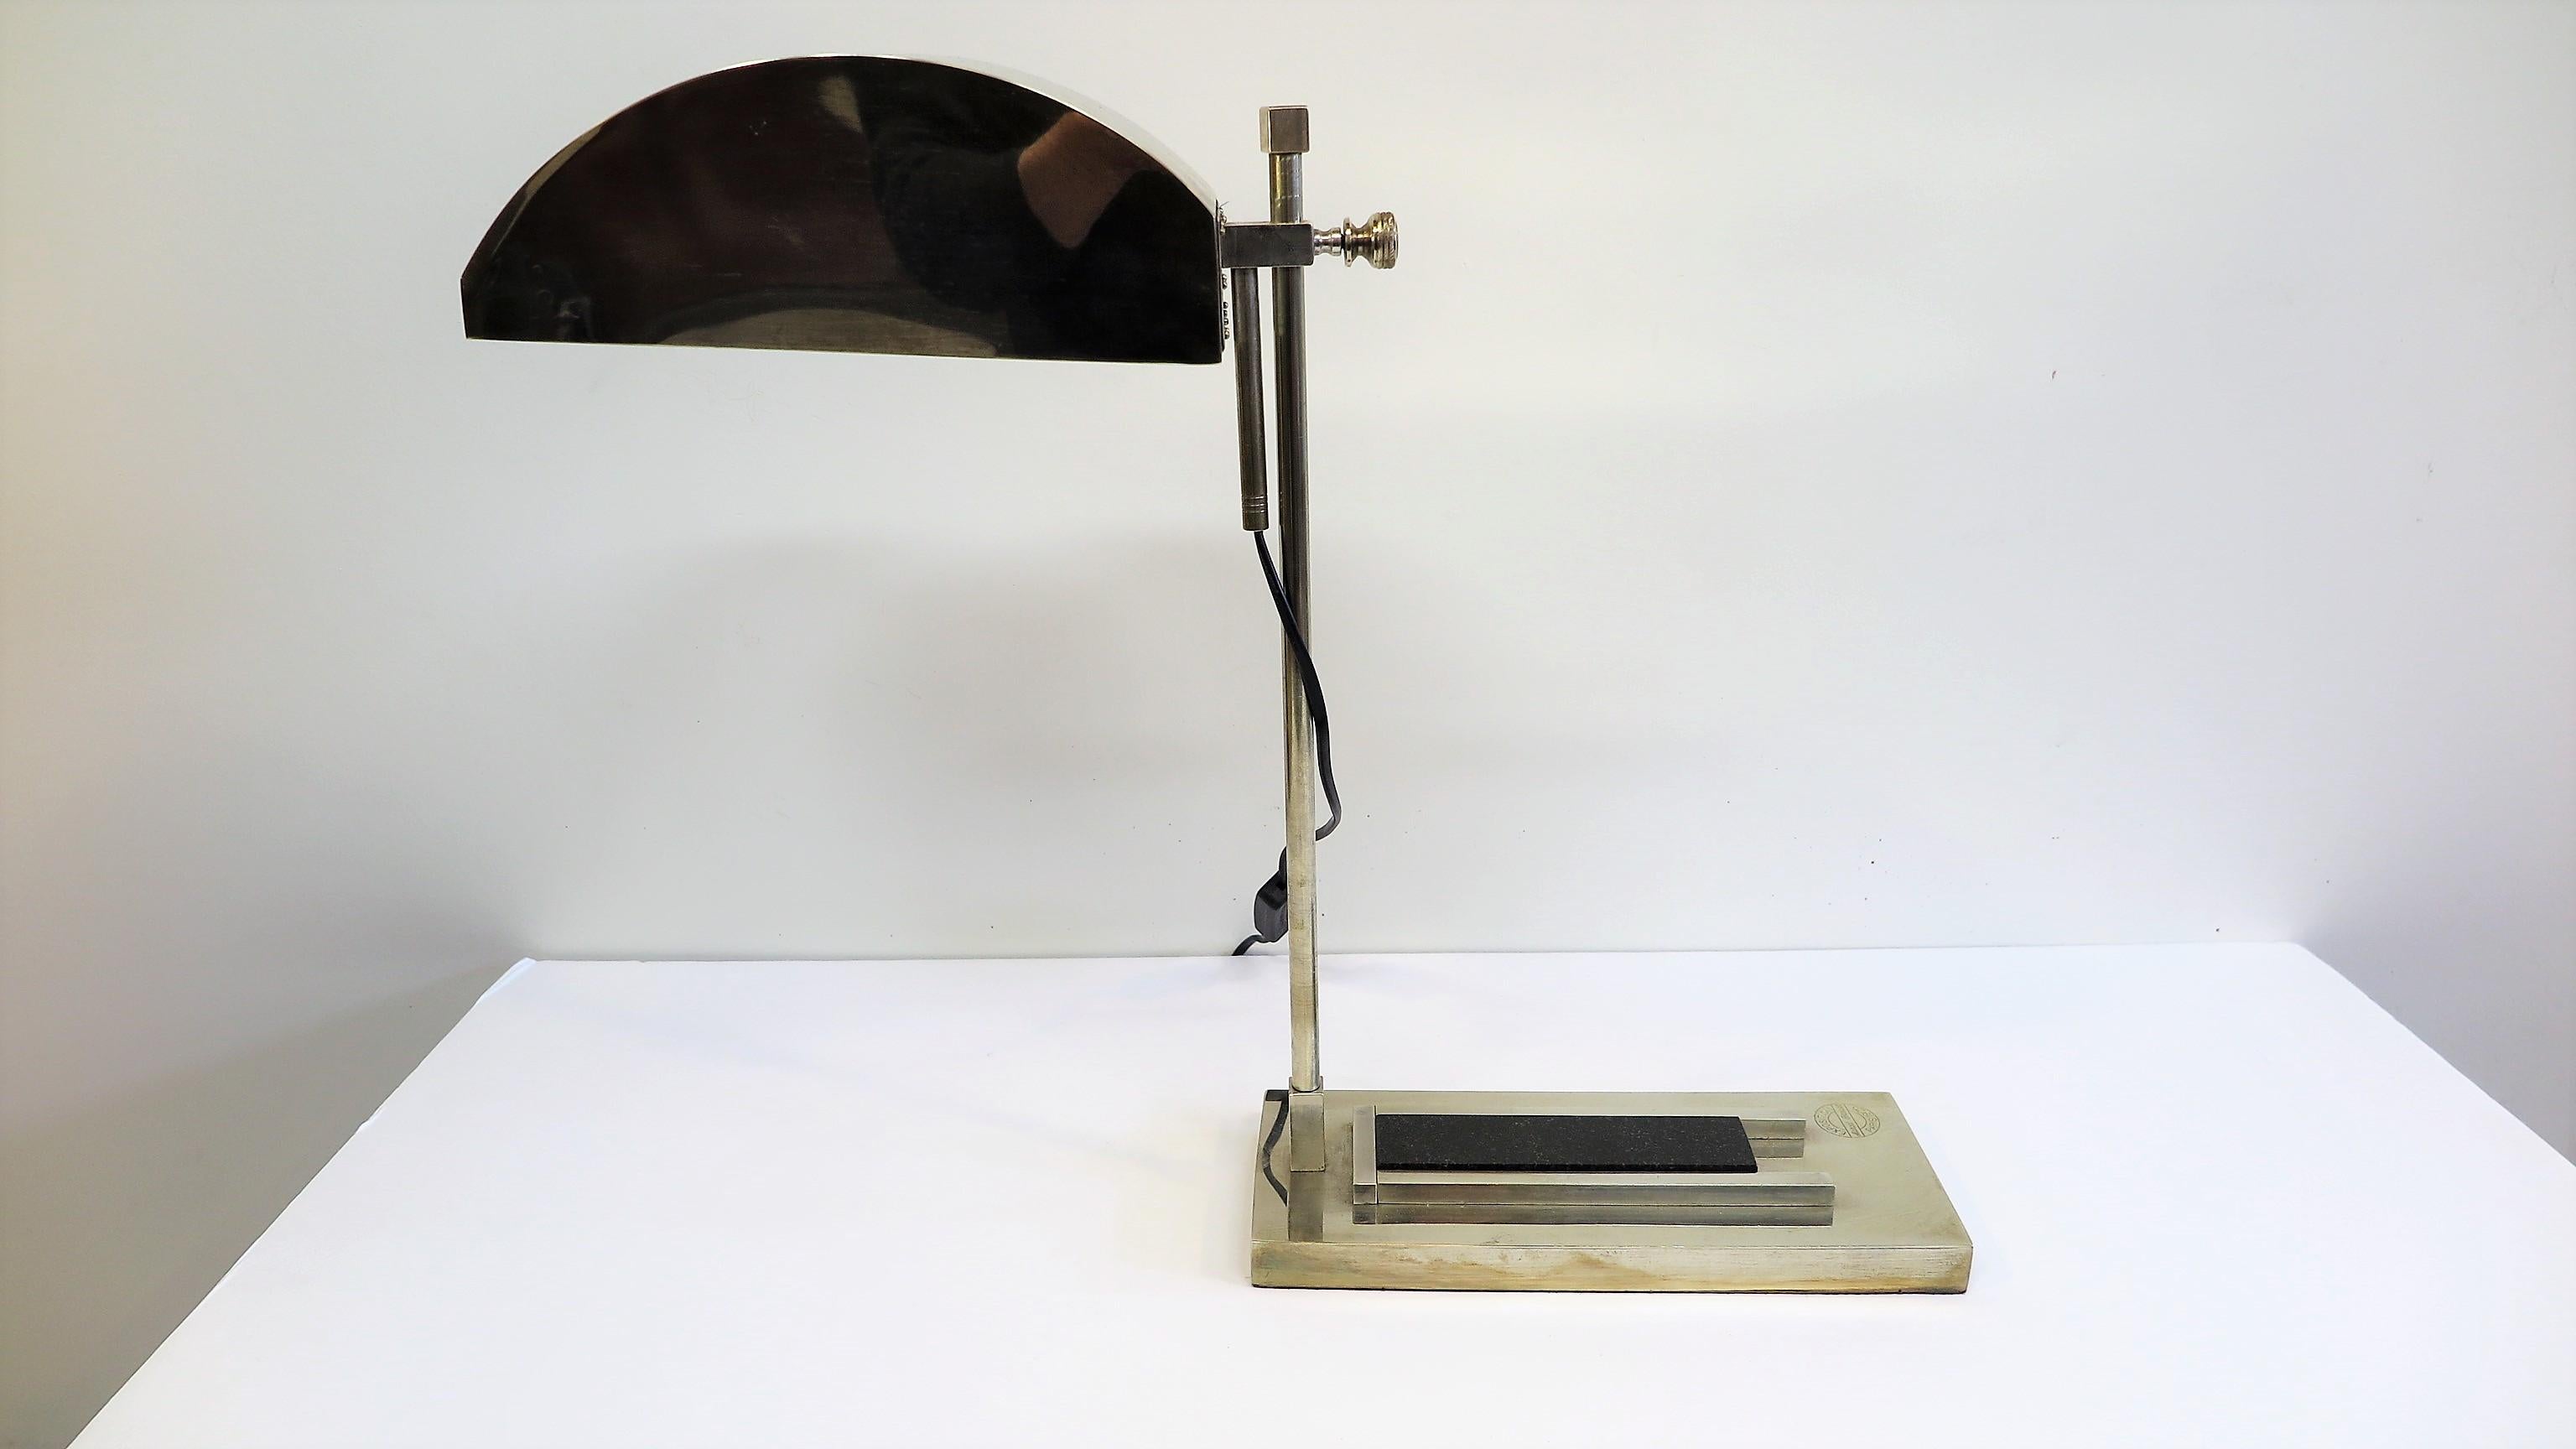 Bauhaus desk lamp by Marcel Breuer. Designed for the International Exposition of Modern Industrial and Decorative Arts, in Paris 1925, number 55 of 100. Articulating movement up and down with full 360 rotation. Composed of brass plated nickel,